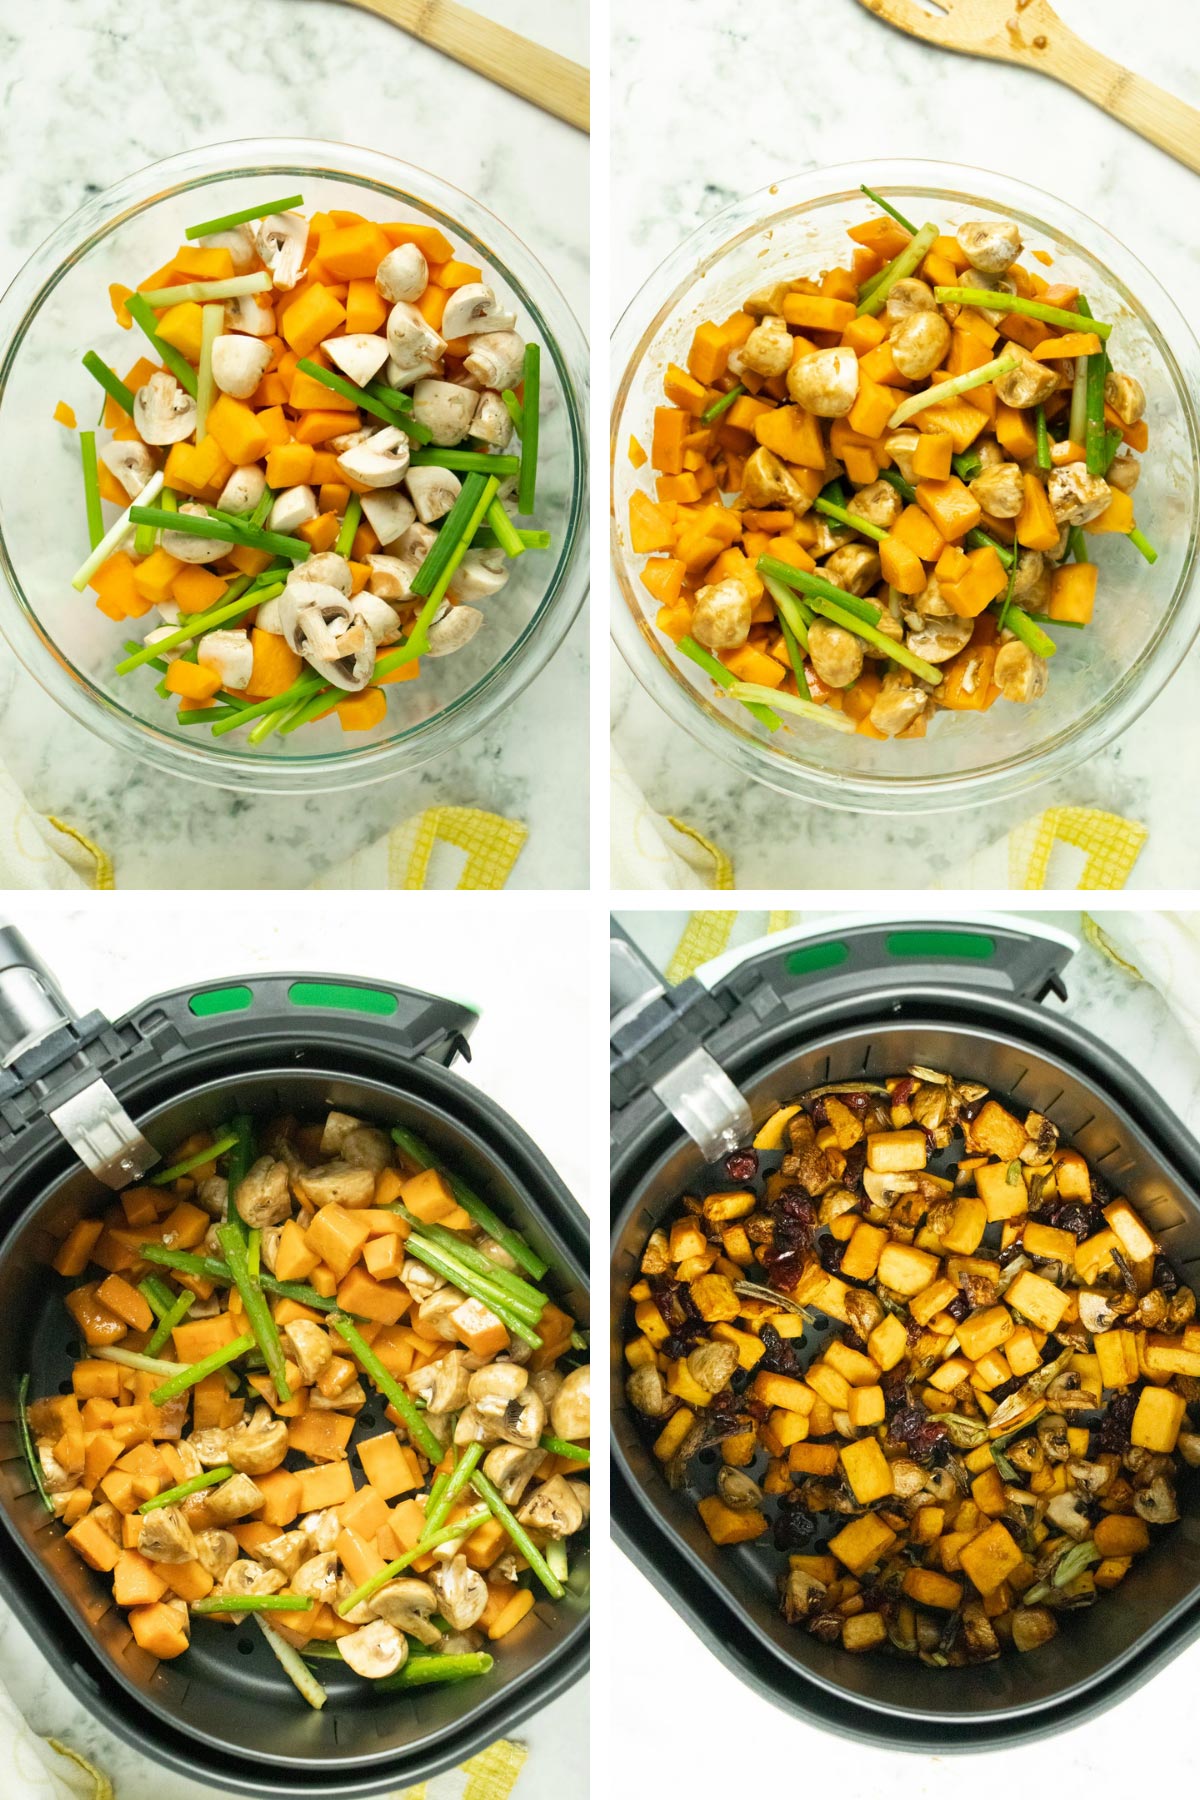 image collage showing butternut squash mixture before and after adding sauce and before and after air frying